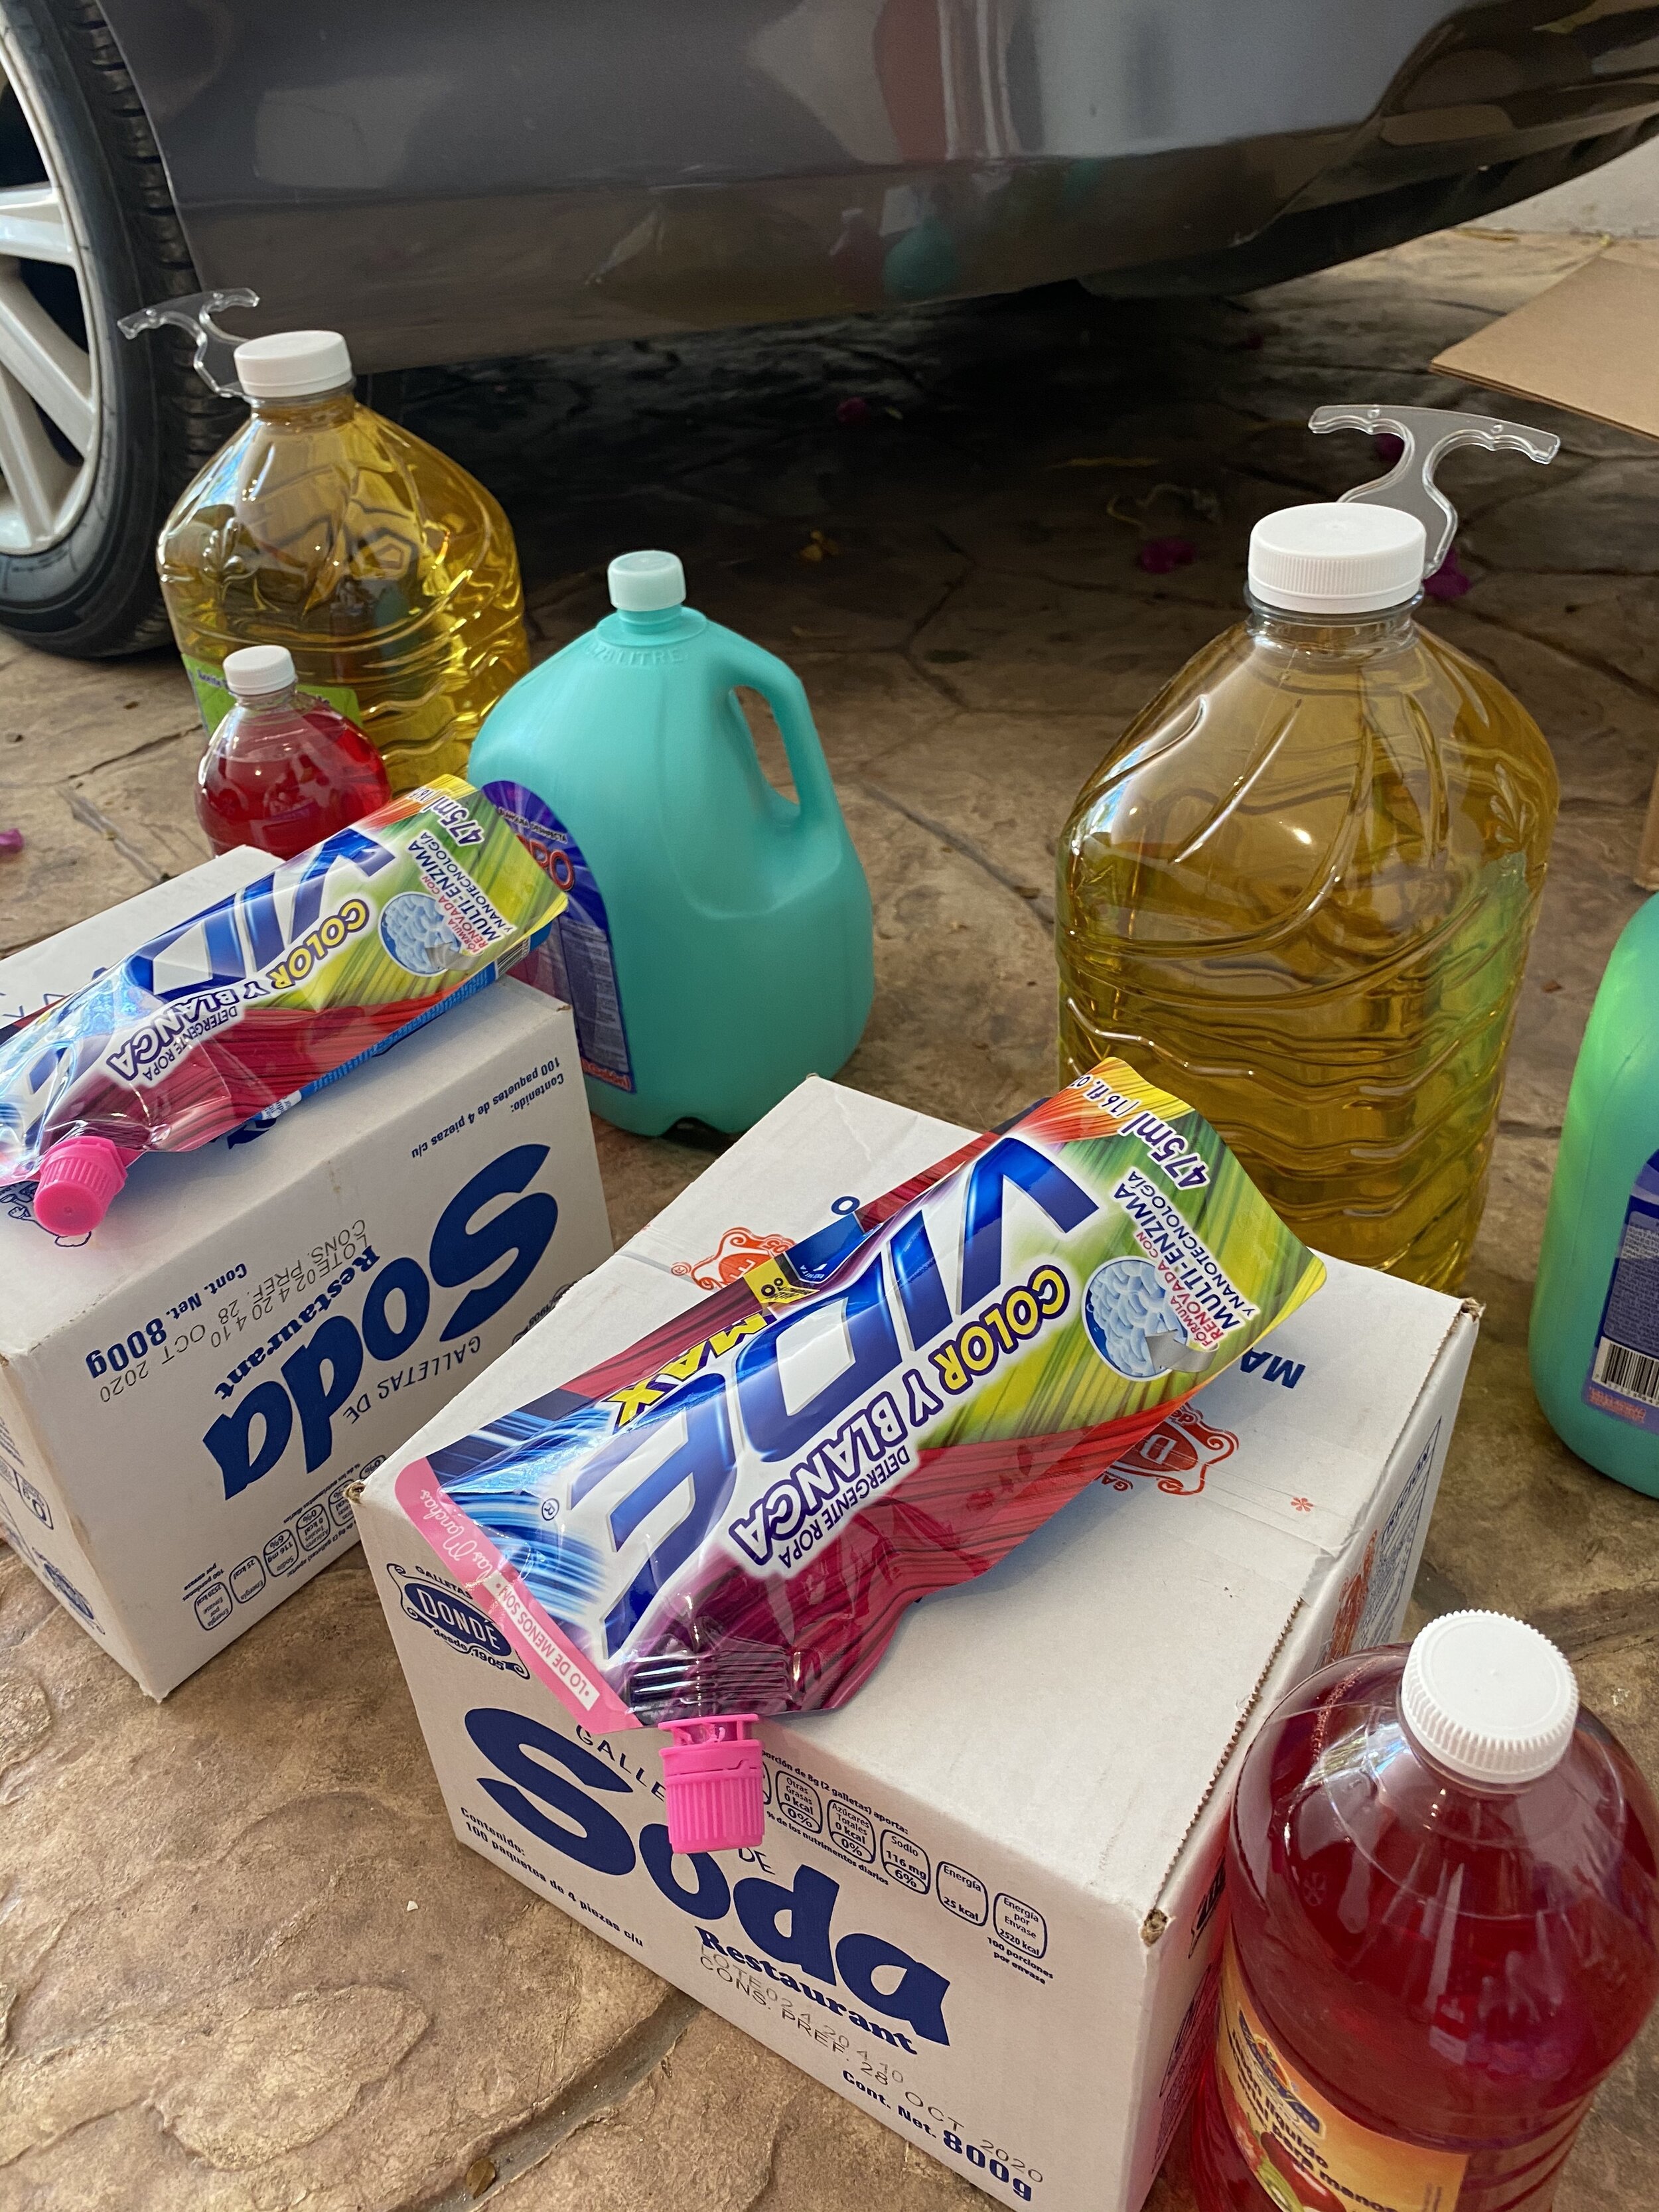  Lawsons  despensa . There are two families, so everything is times two and we are taking these items every two weeks. In the village, it turns out that the recipients of these  despensas  turn around and share with neighbors so your donations are go